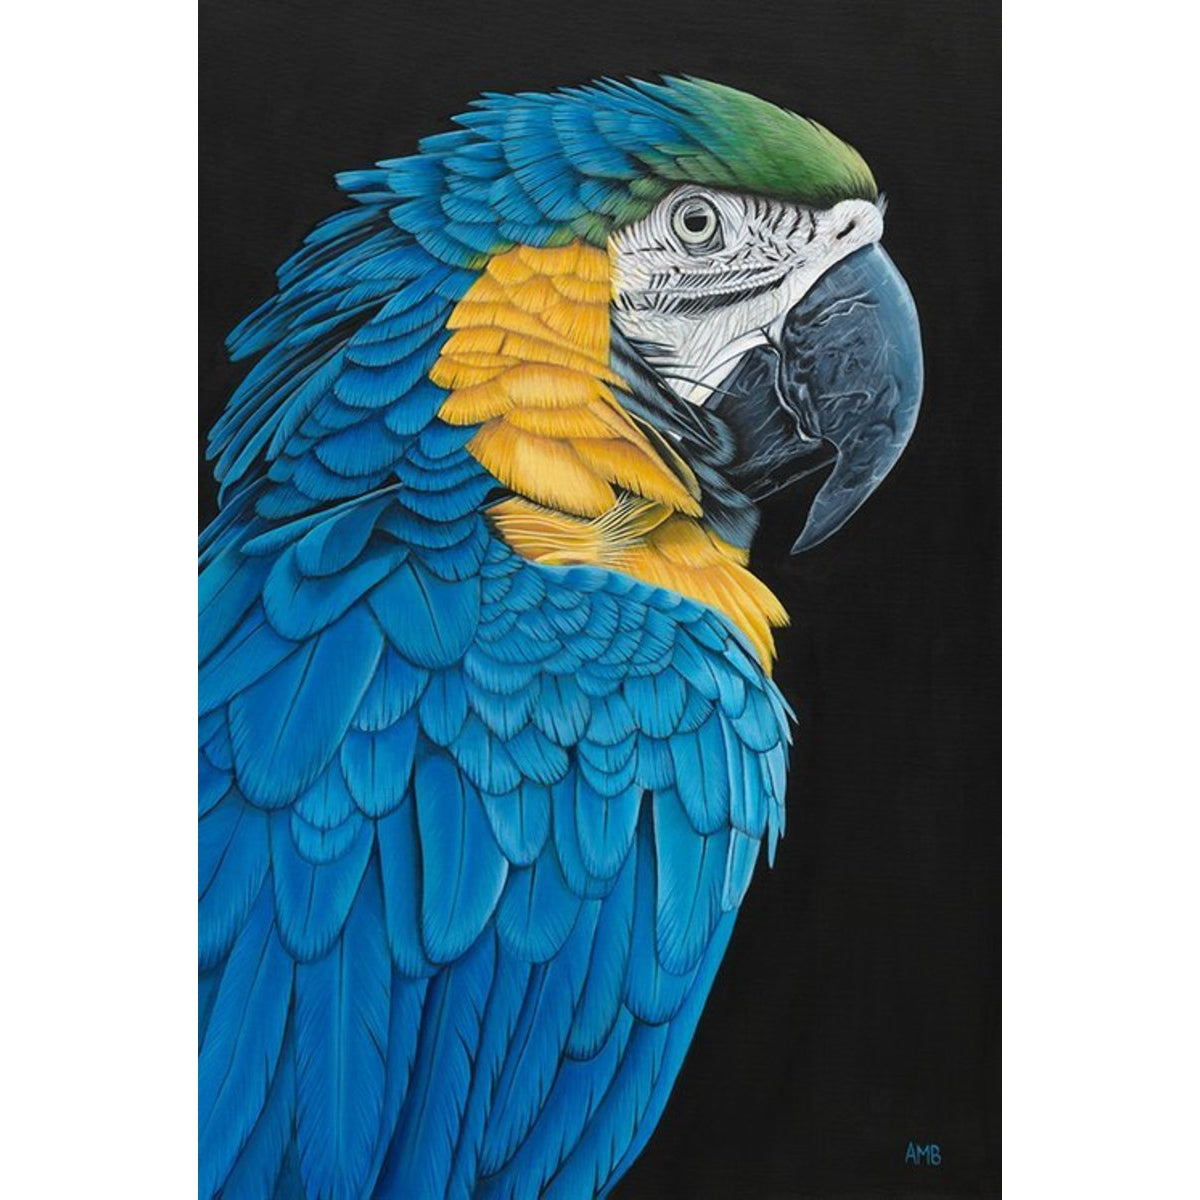 Anastasia – Blue and Gold Macaw - Acrylic on canvas